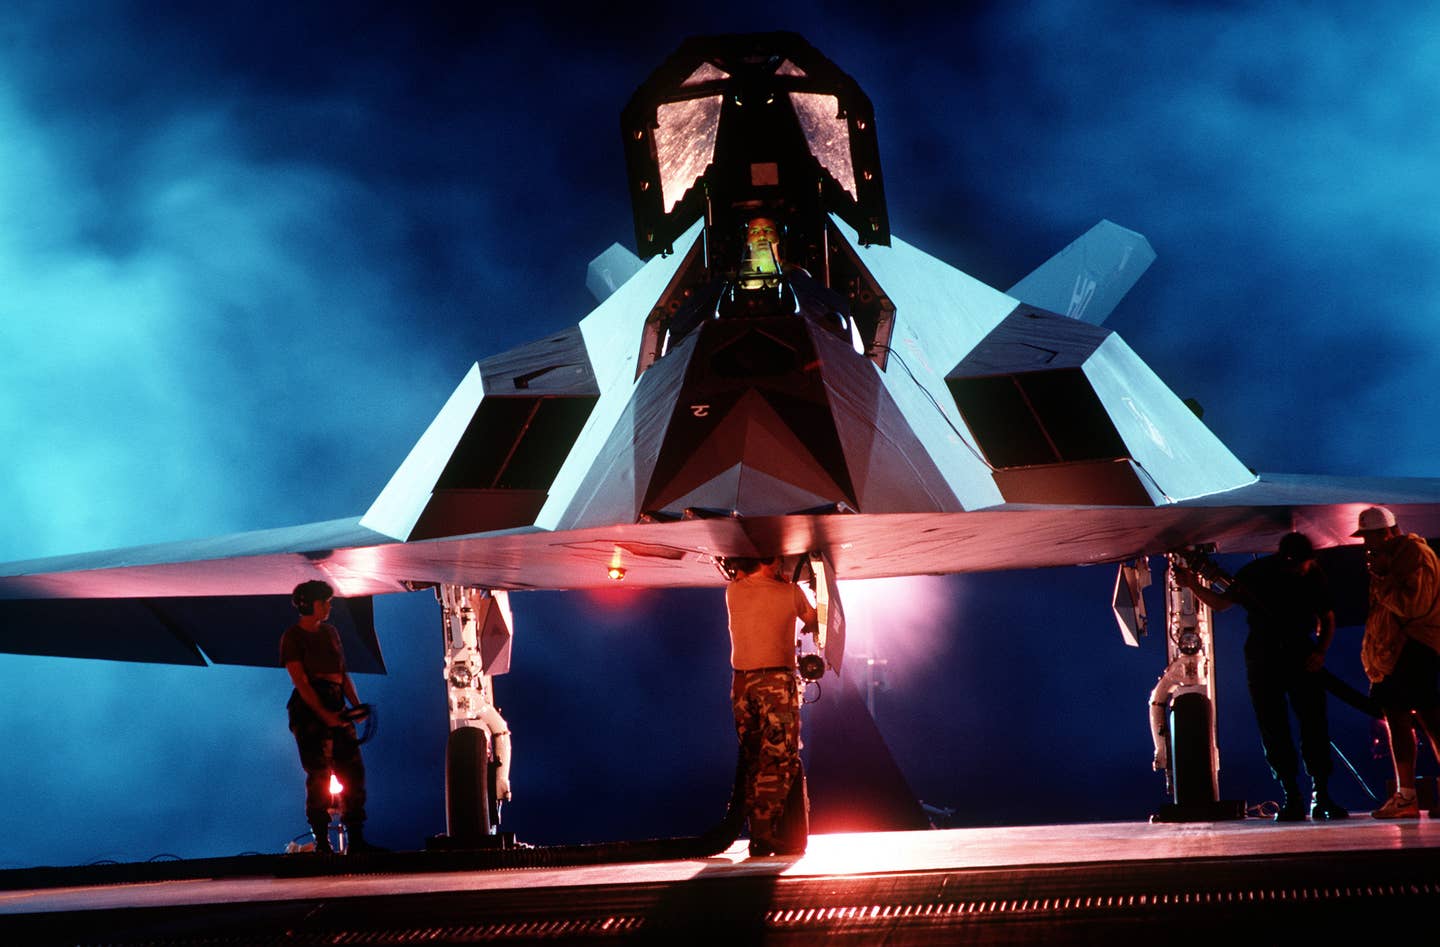 A back lit front view of an F-117 Nighthawk.